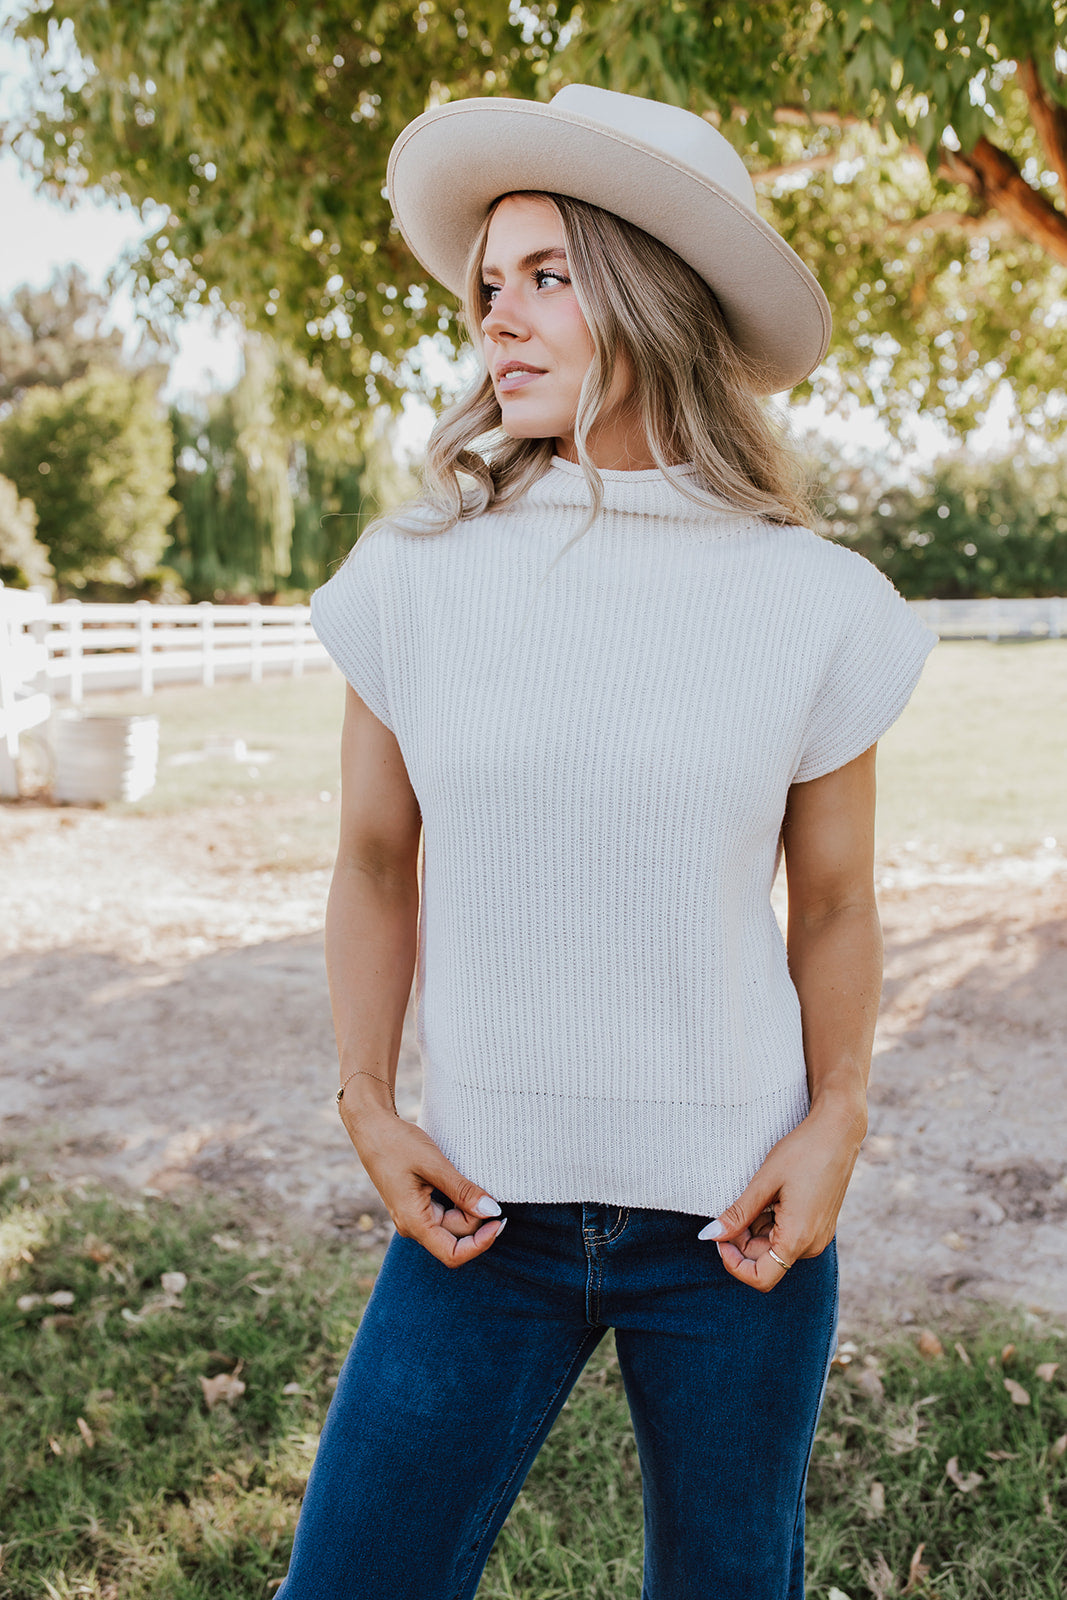 THE LOOKING CHIC SWEATER VEST IN CREAM